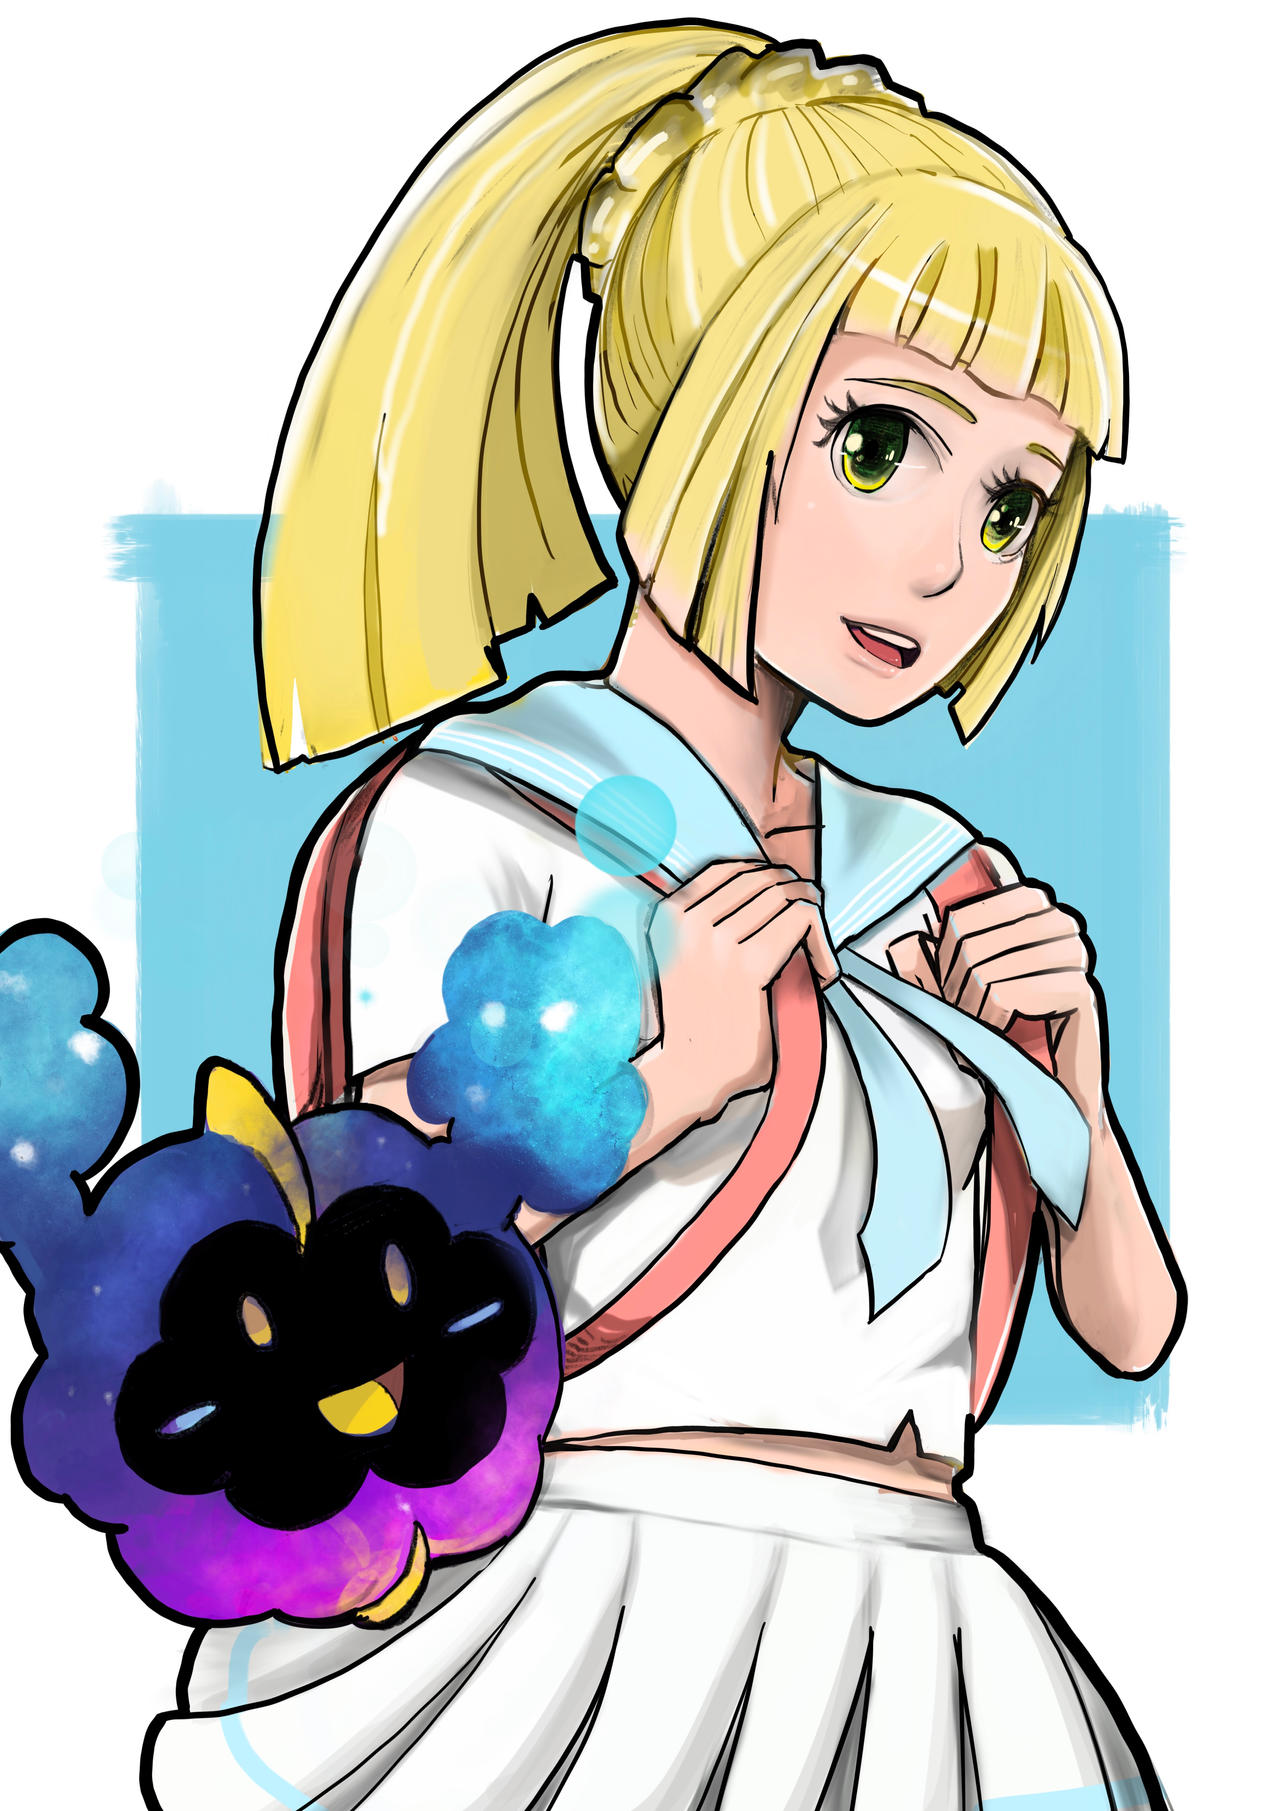 Lillie and Nebby